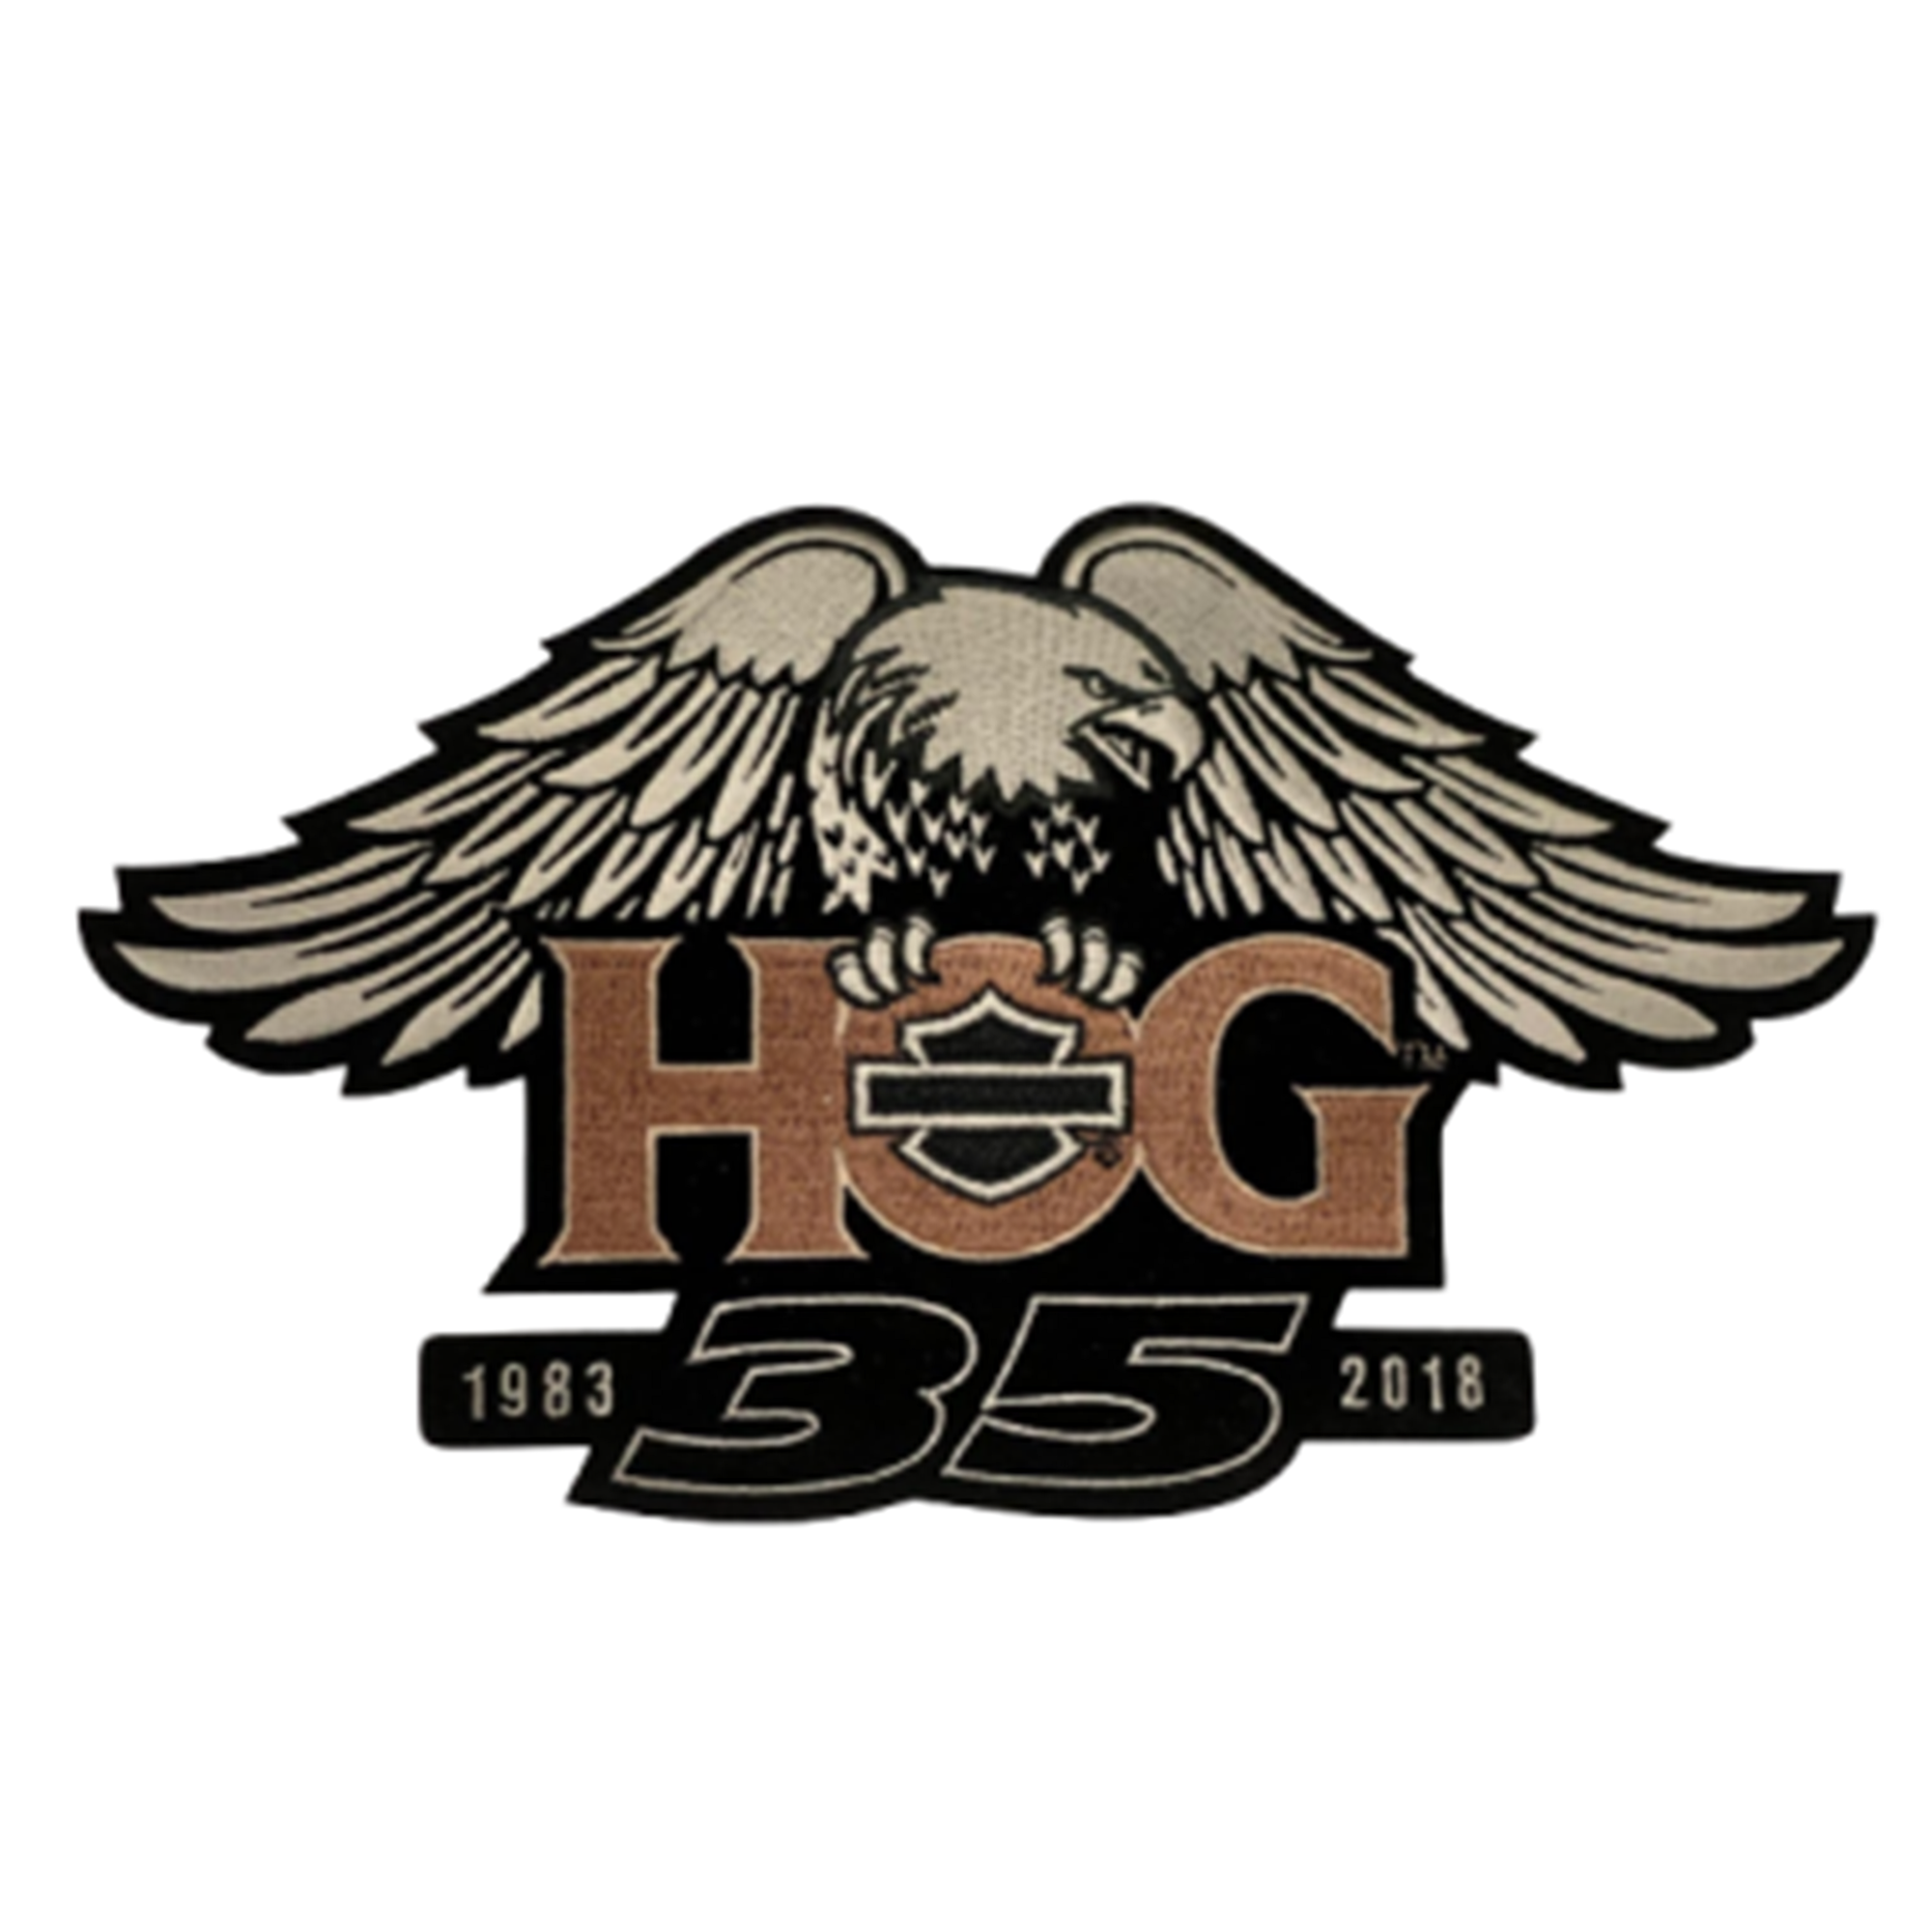 H.O.G. Eagle 35th Anniversary Patch